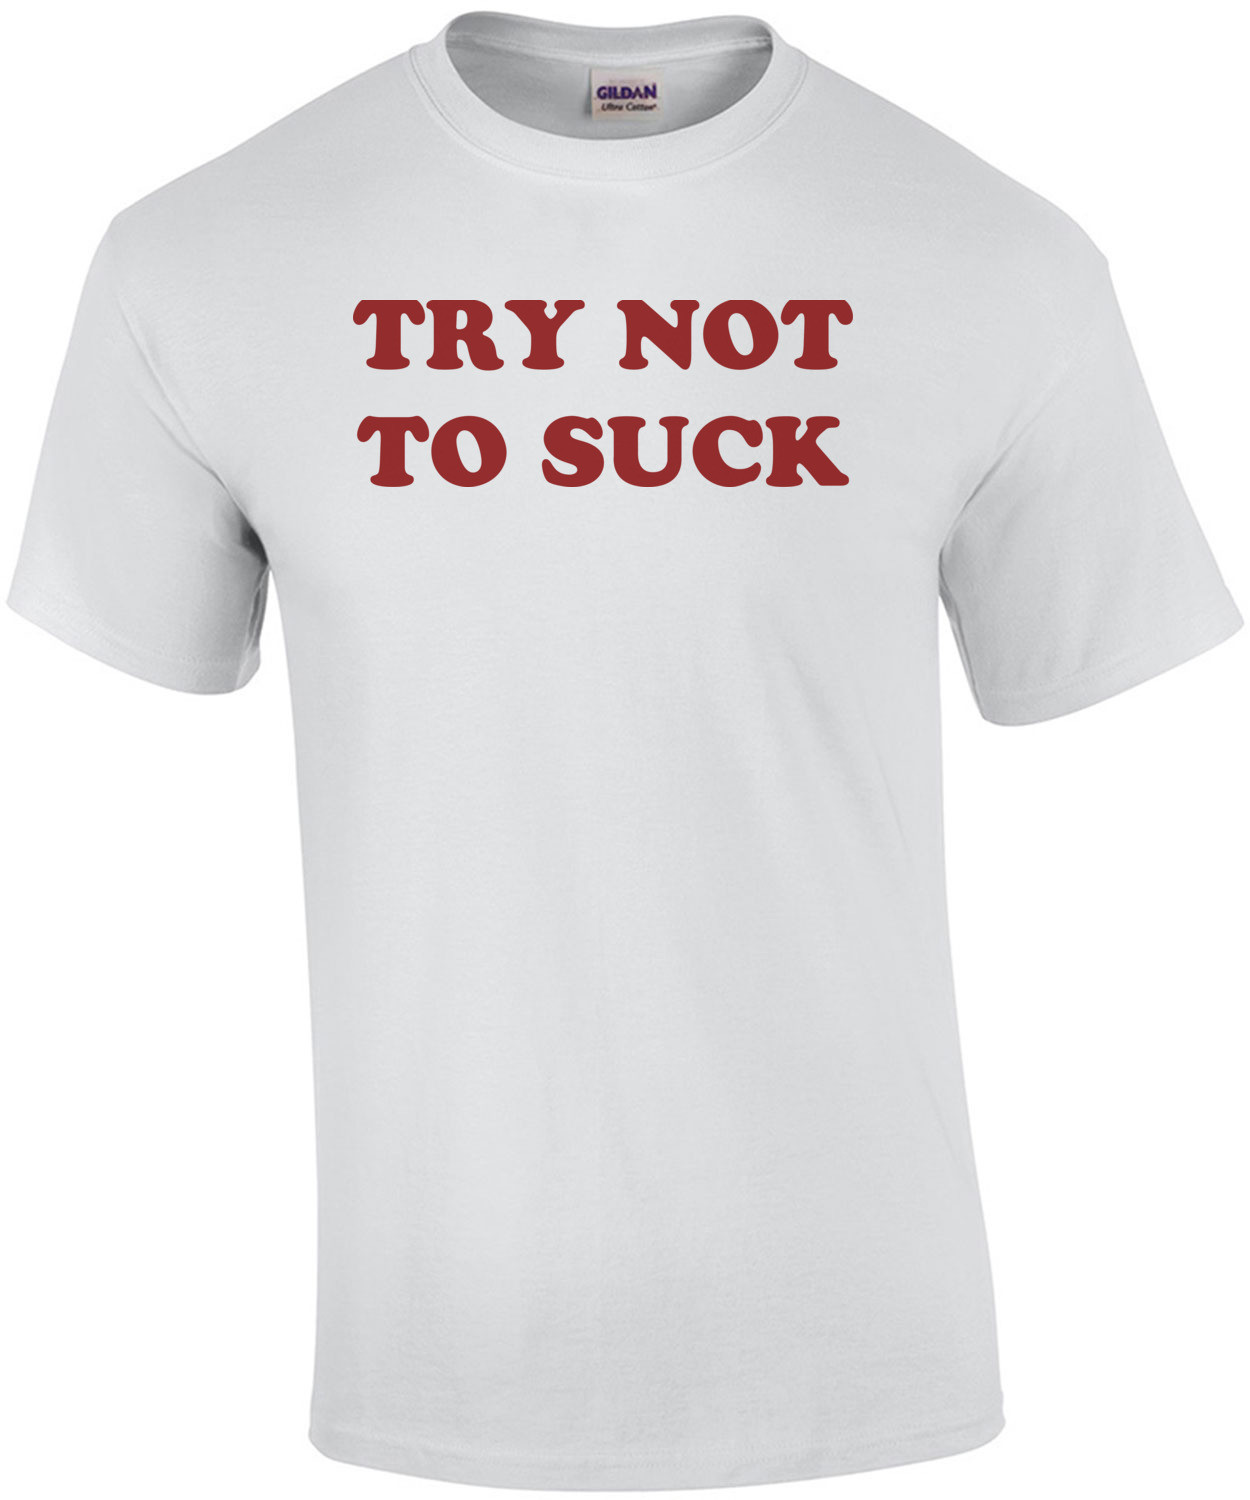 TRY NOT TO SUCK funny  Shirt